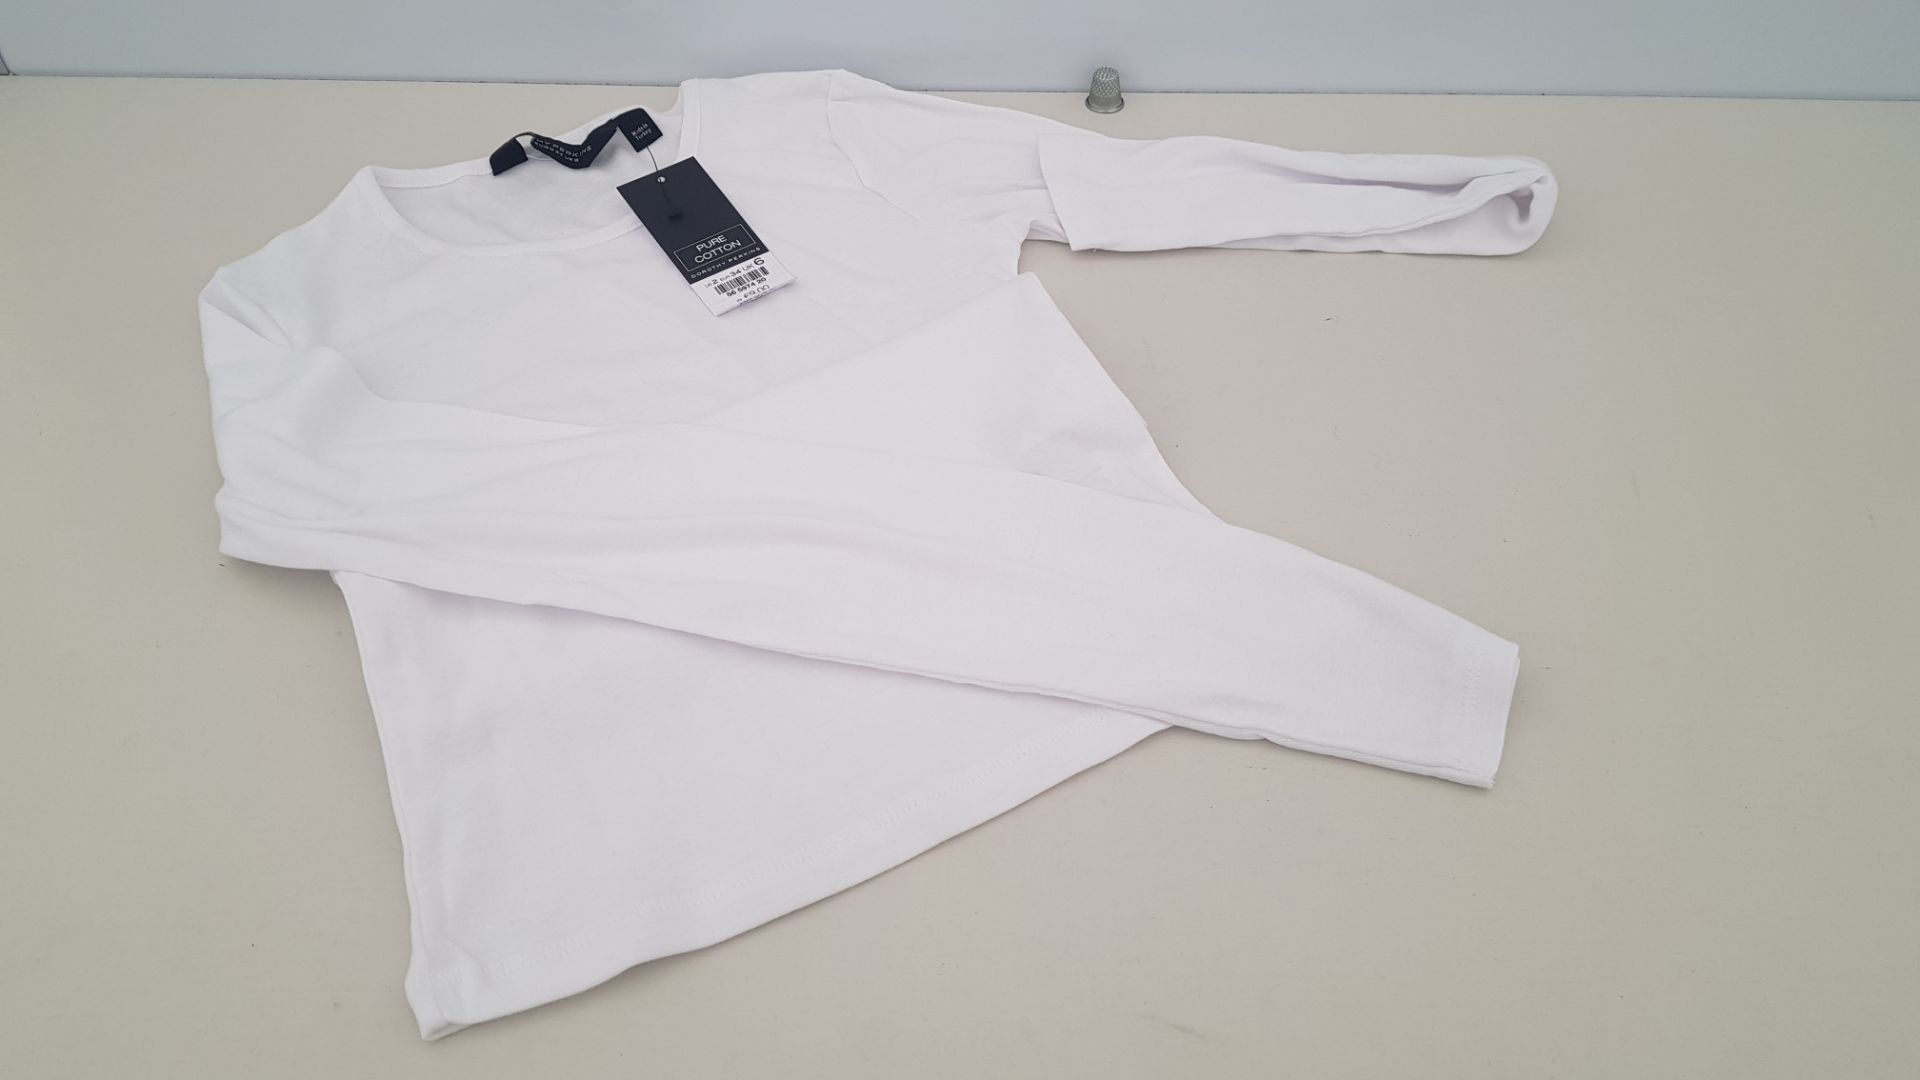 30 X BRAND NEW DOROTHY PERKINS PURE COTTON WHITE LONG SLEEVED TOPS UK SIZE 10 AND 18 RRP £7.00 (